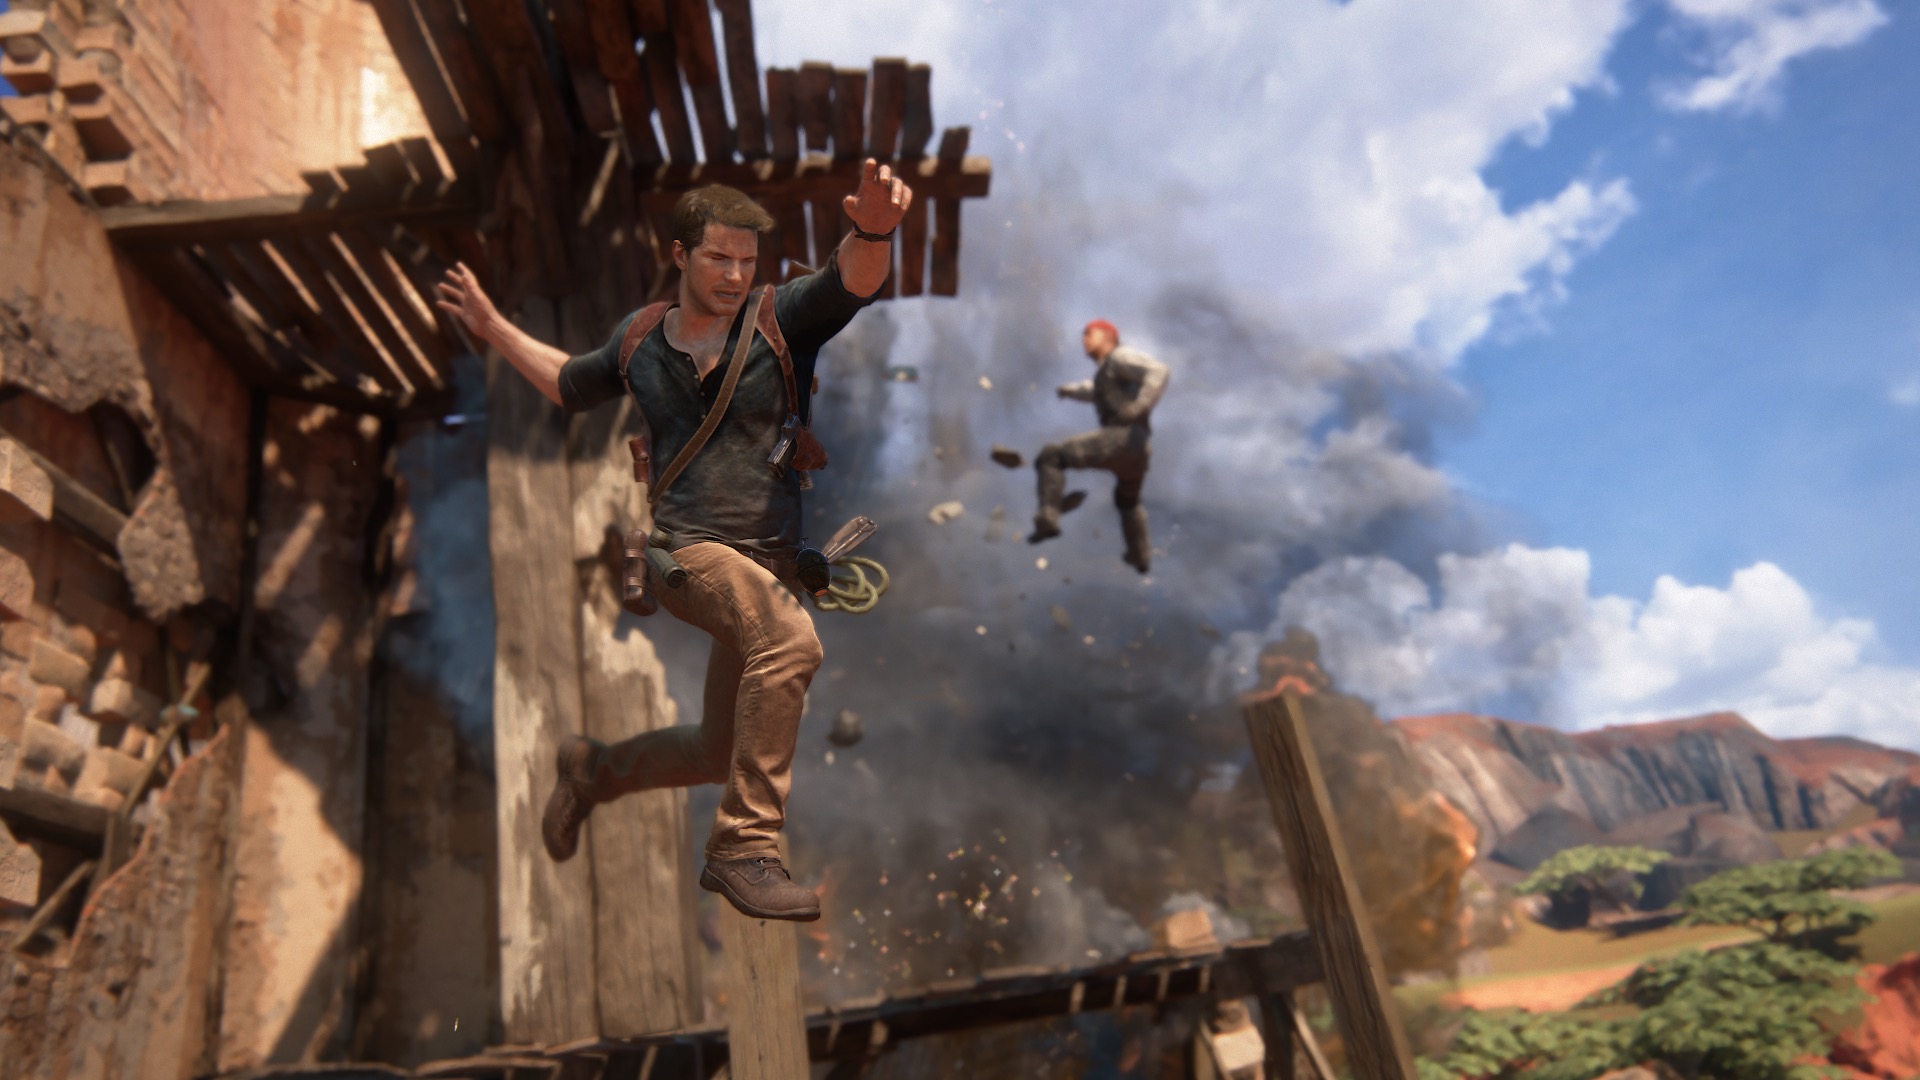 Media asset in full size related to 3dfxzone.it news item entitled as follows: Sony pubblica un gameplay trailer di 15 minuti su Uncharted 4: A Thief's End | Image Name: news24088_Uncharted-4-Screenshot_18.jpg